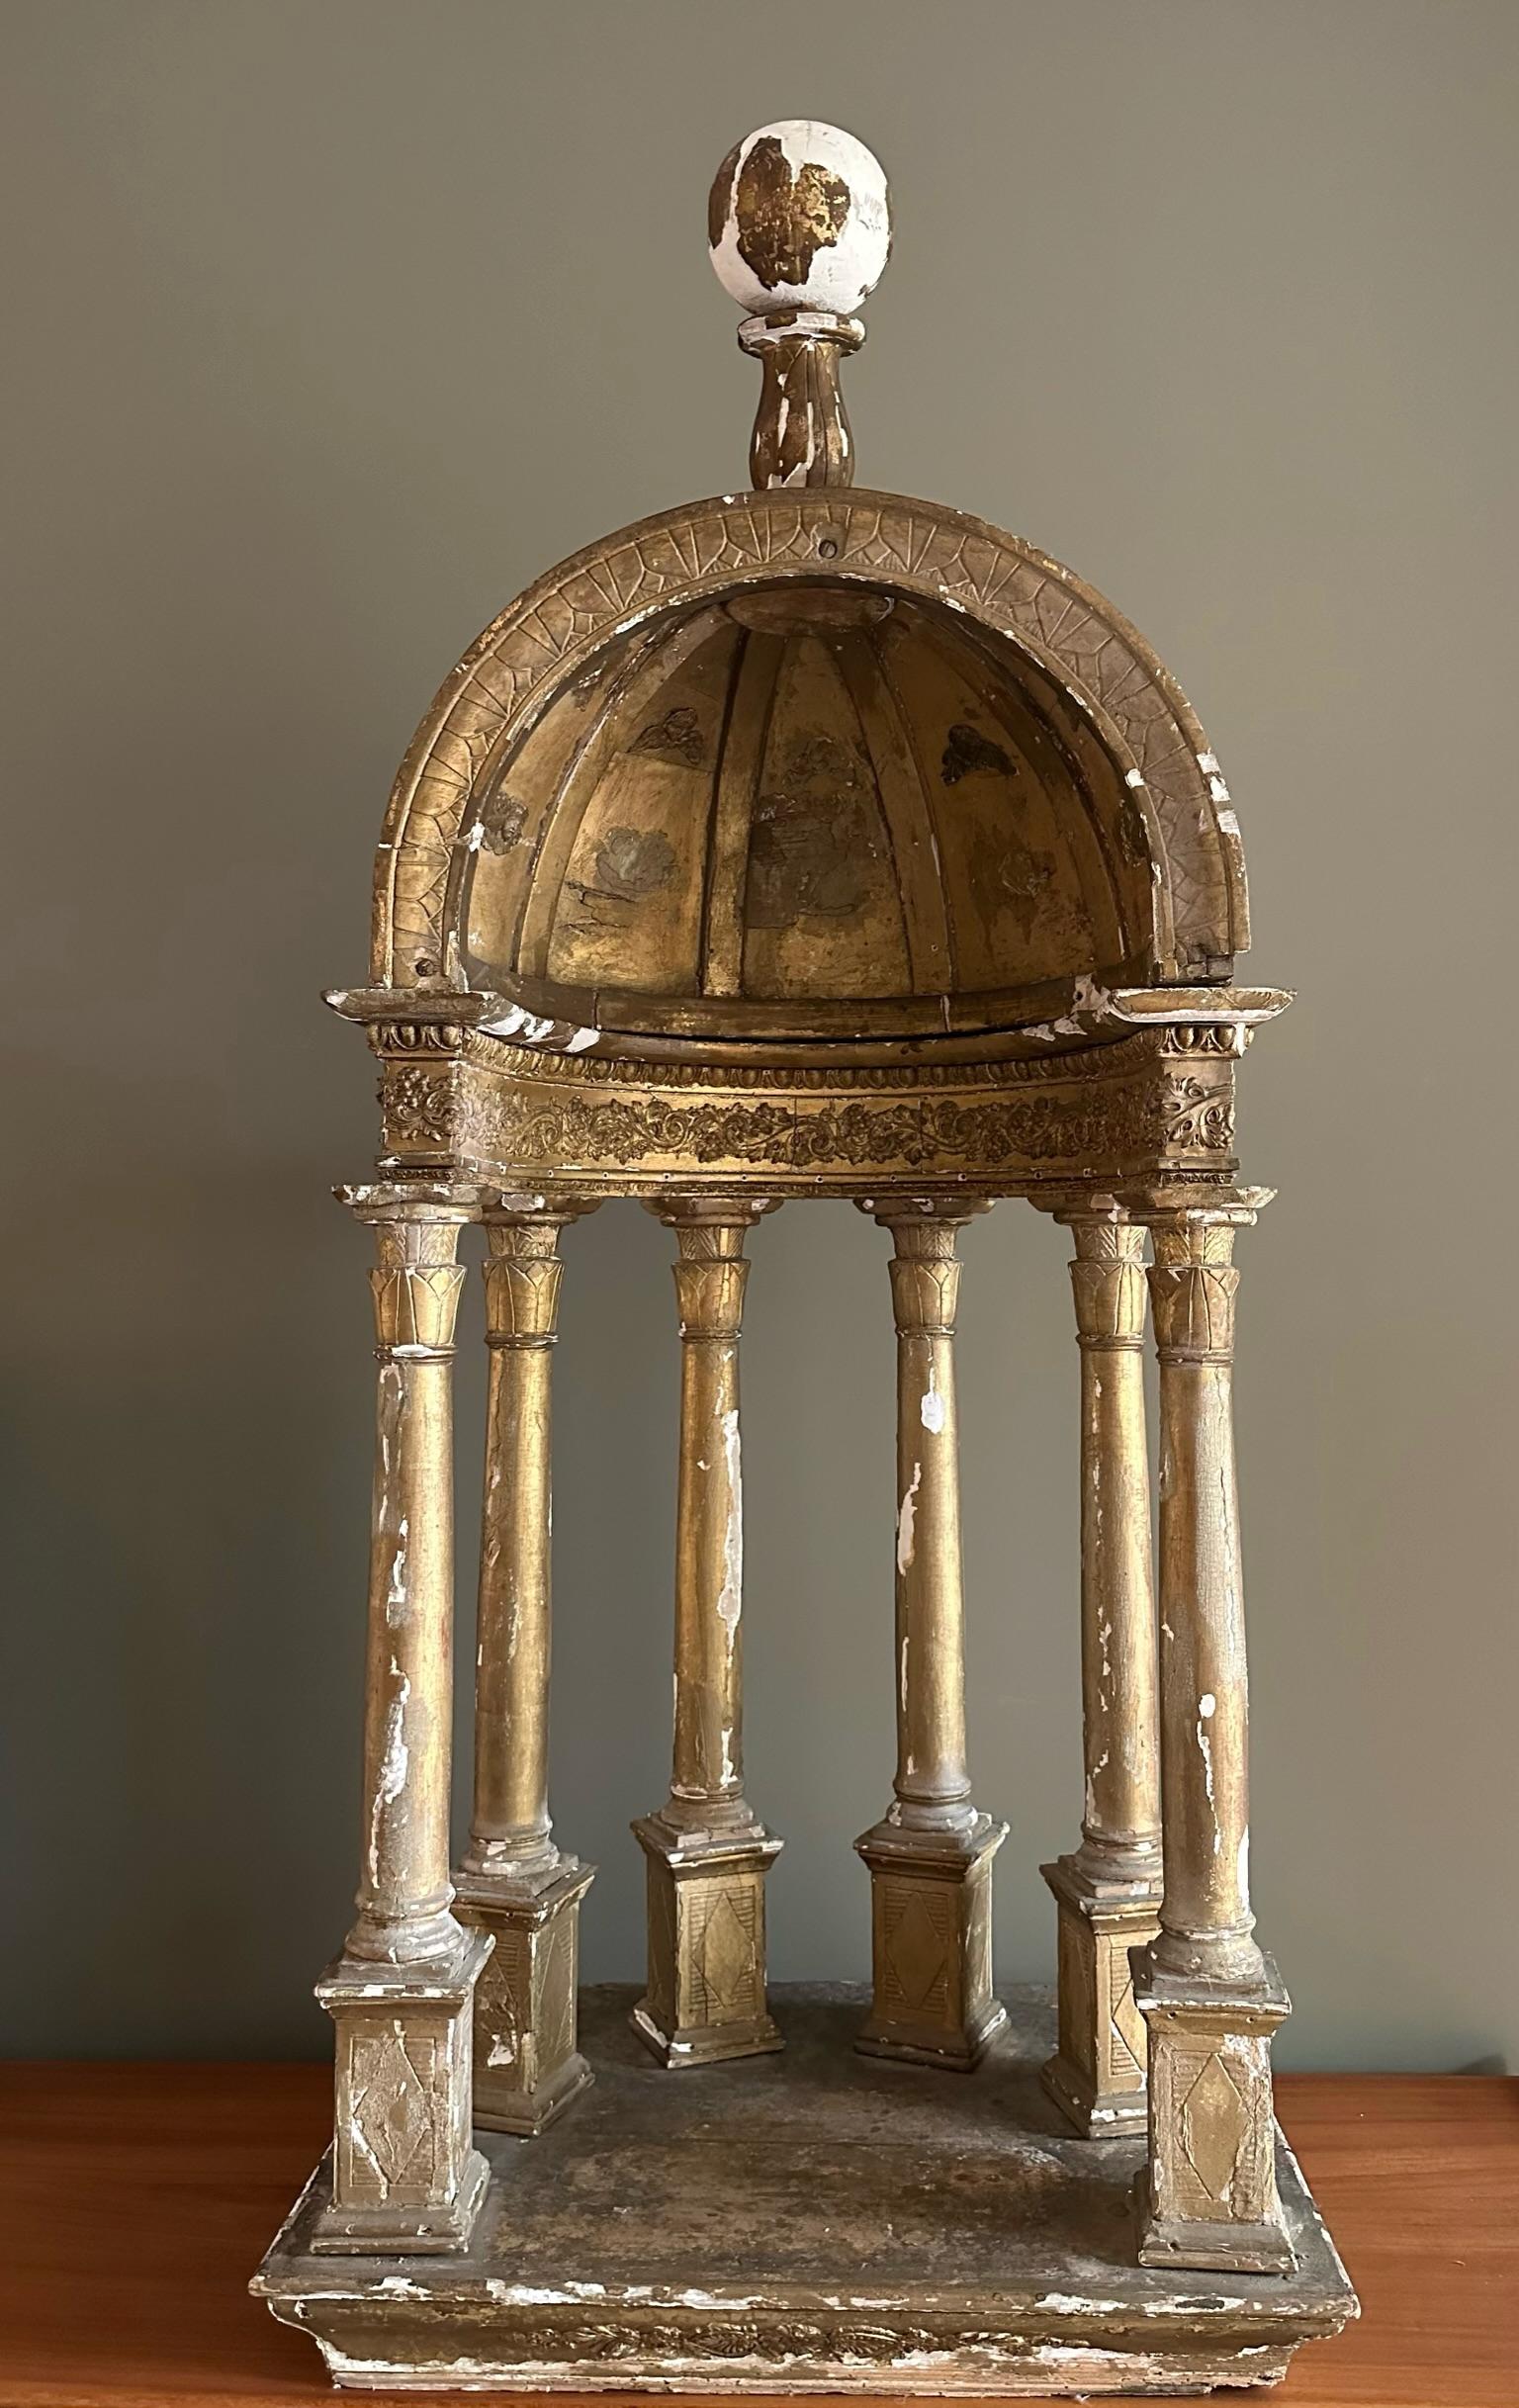 A wonderful 19th century French tabernacle or dome.
Made from wood and plaster. With beautiful gilt remnants.

The piece has a wonderful patina.

An impressive piece for an eclectic interior.
